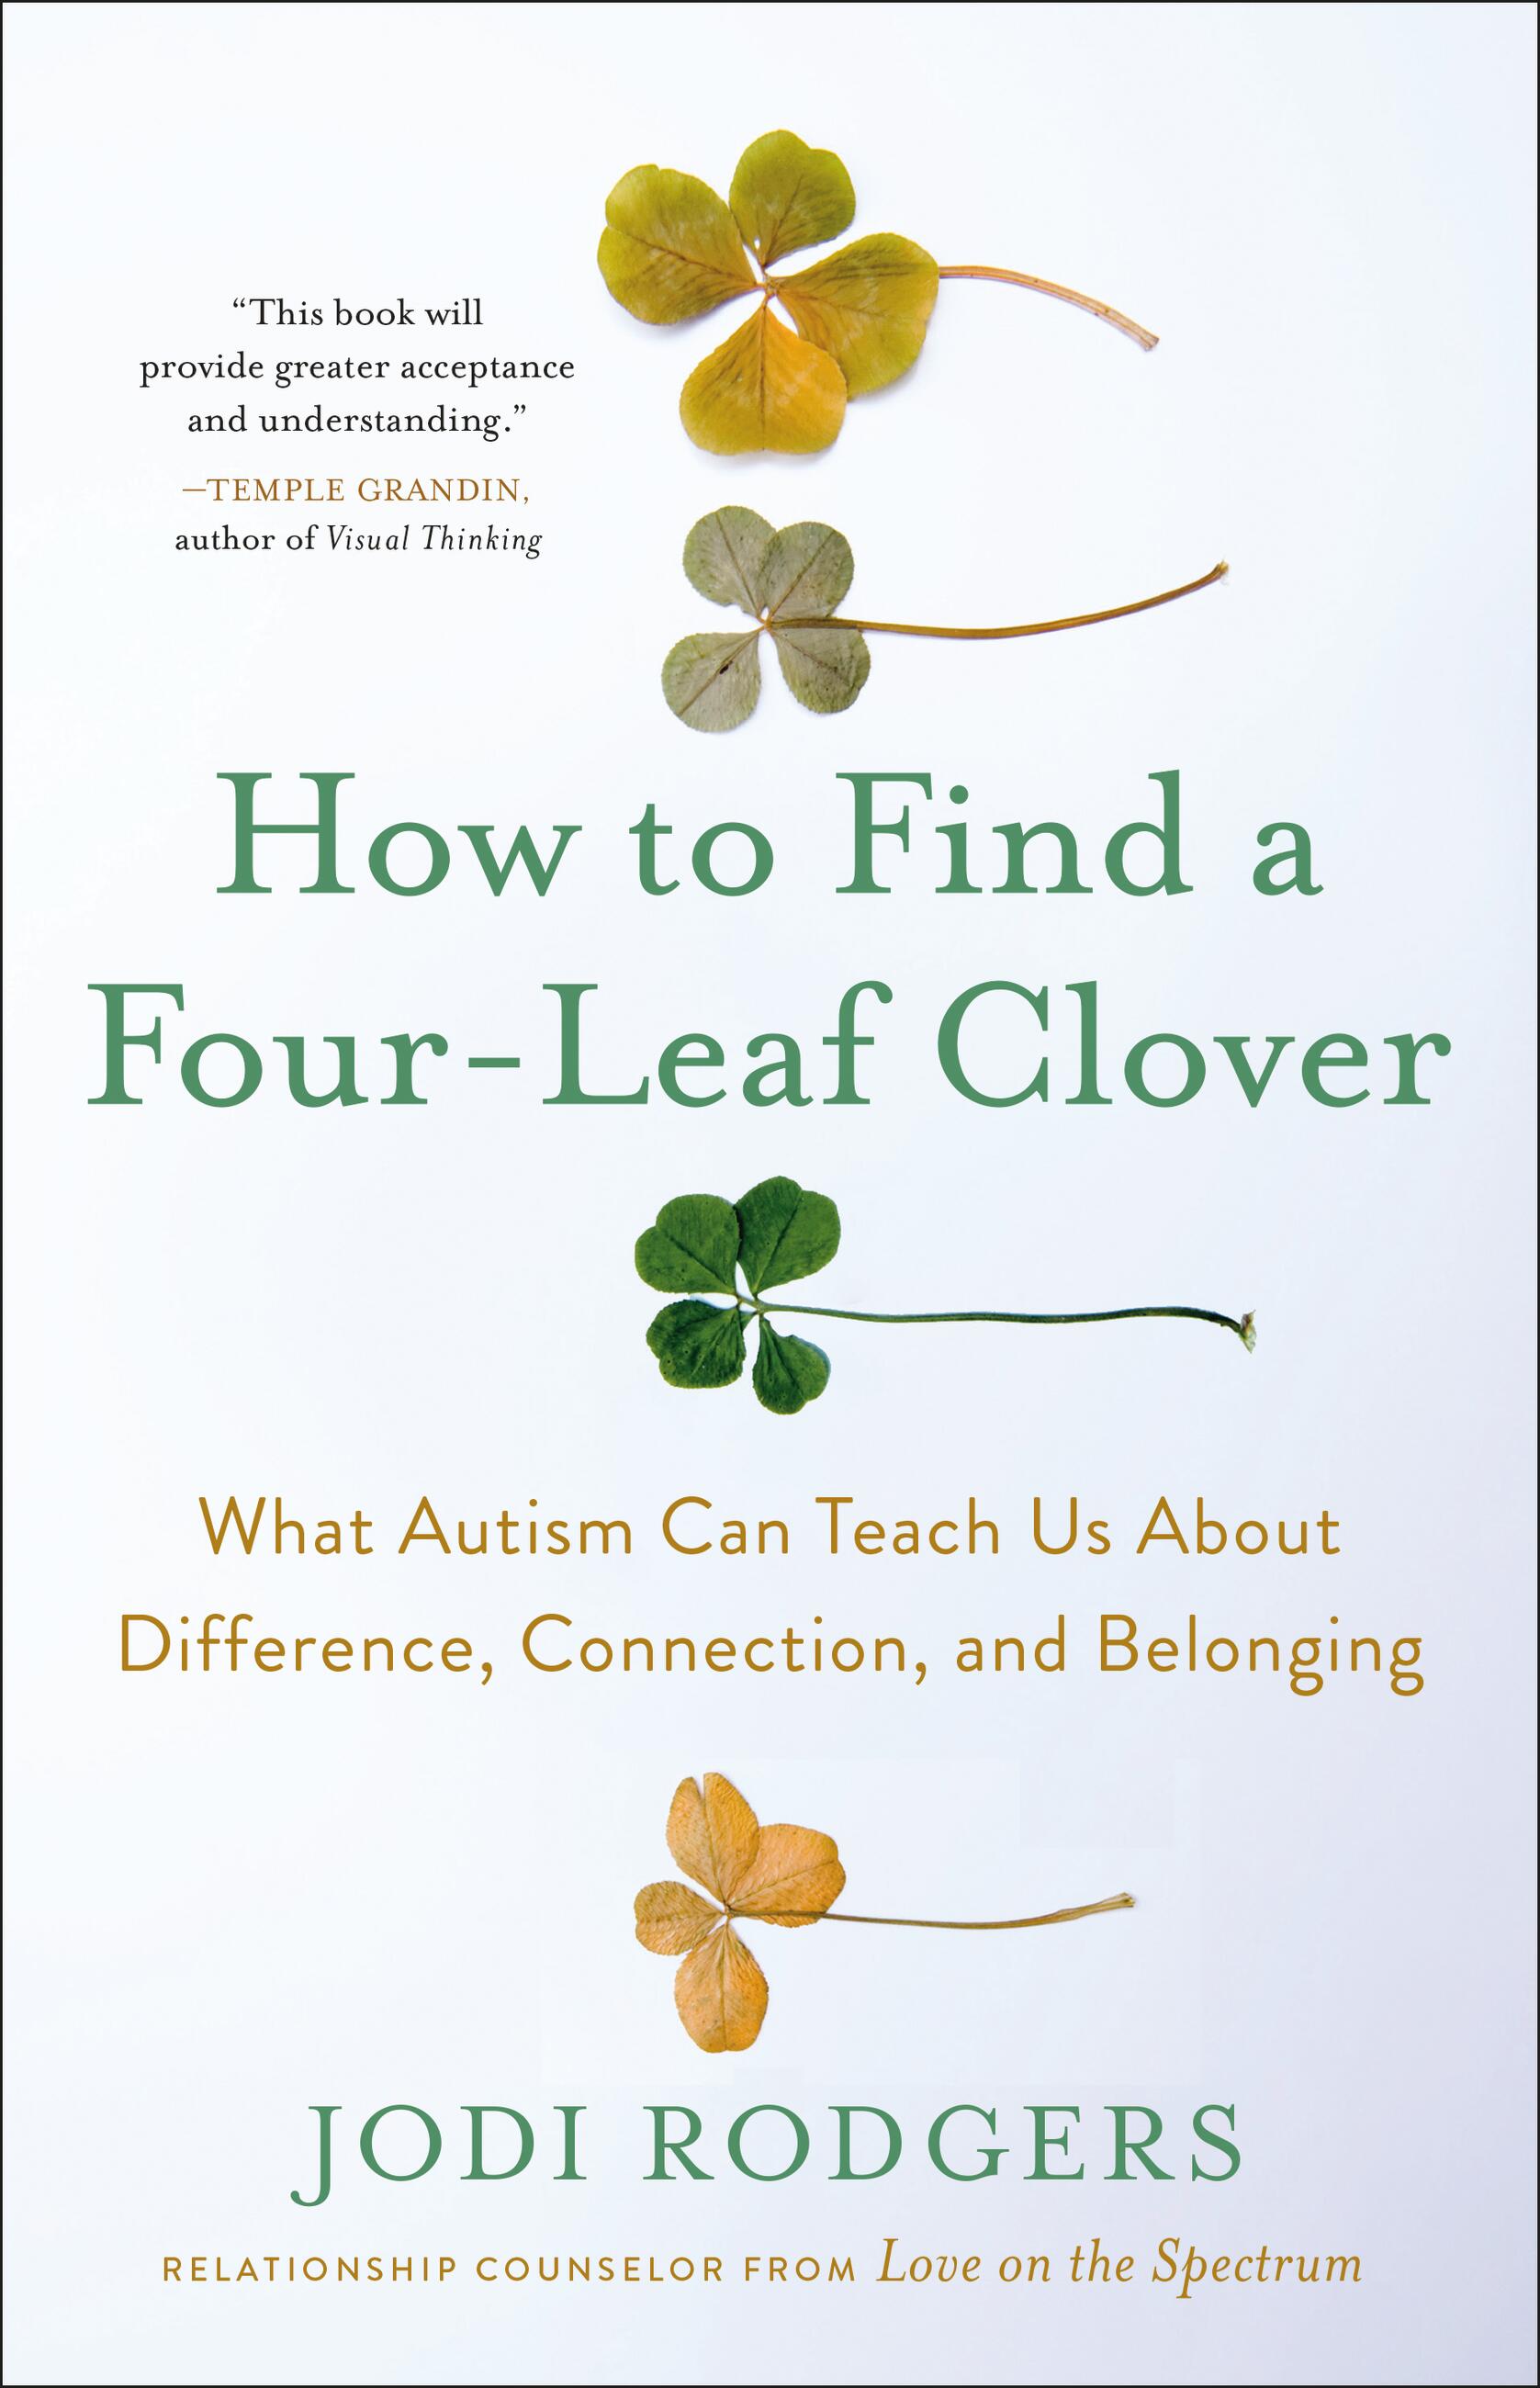 How to Find a Four-Leaf Clover (and Other News You Can Use!)